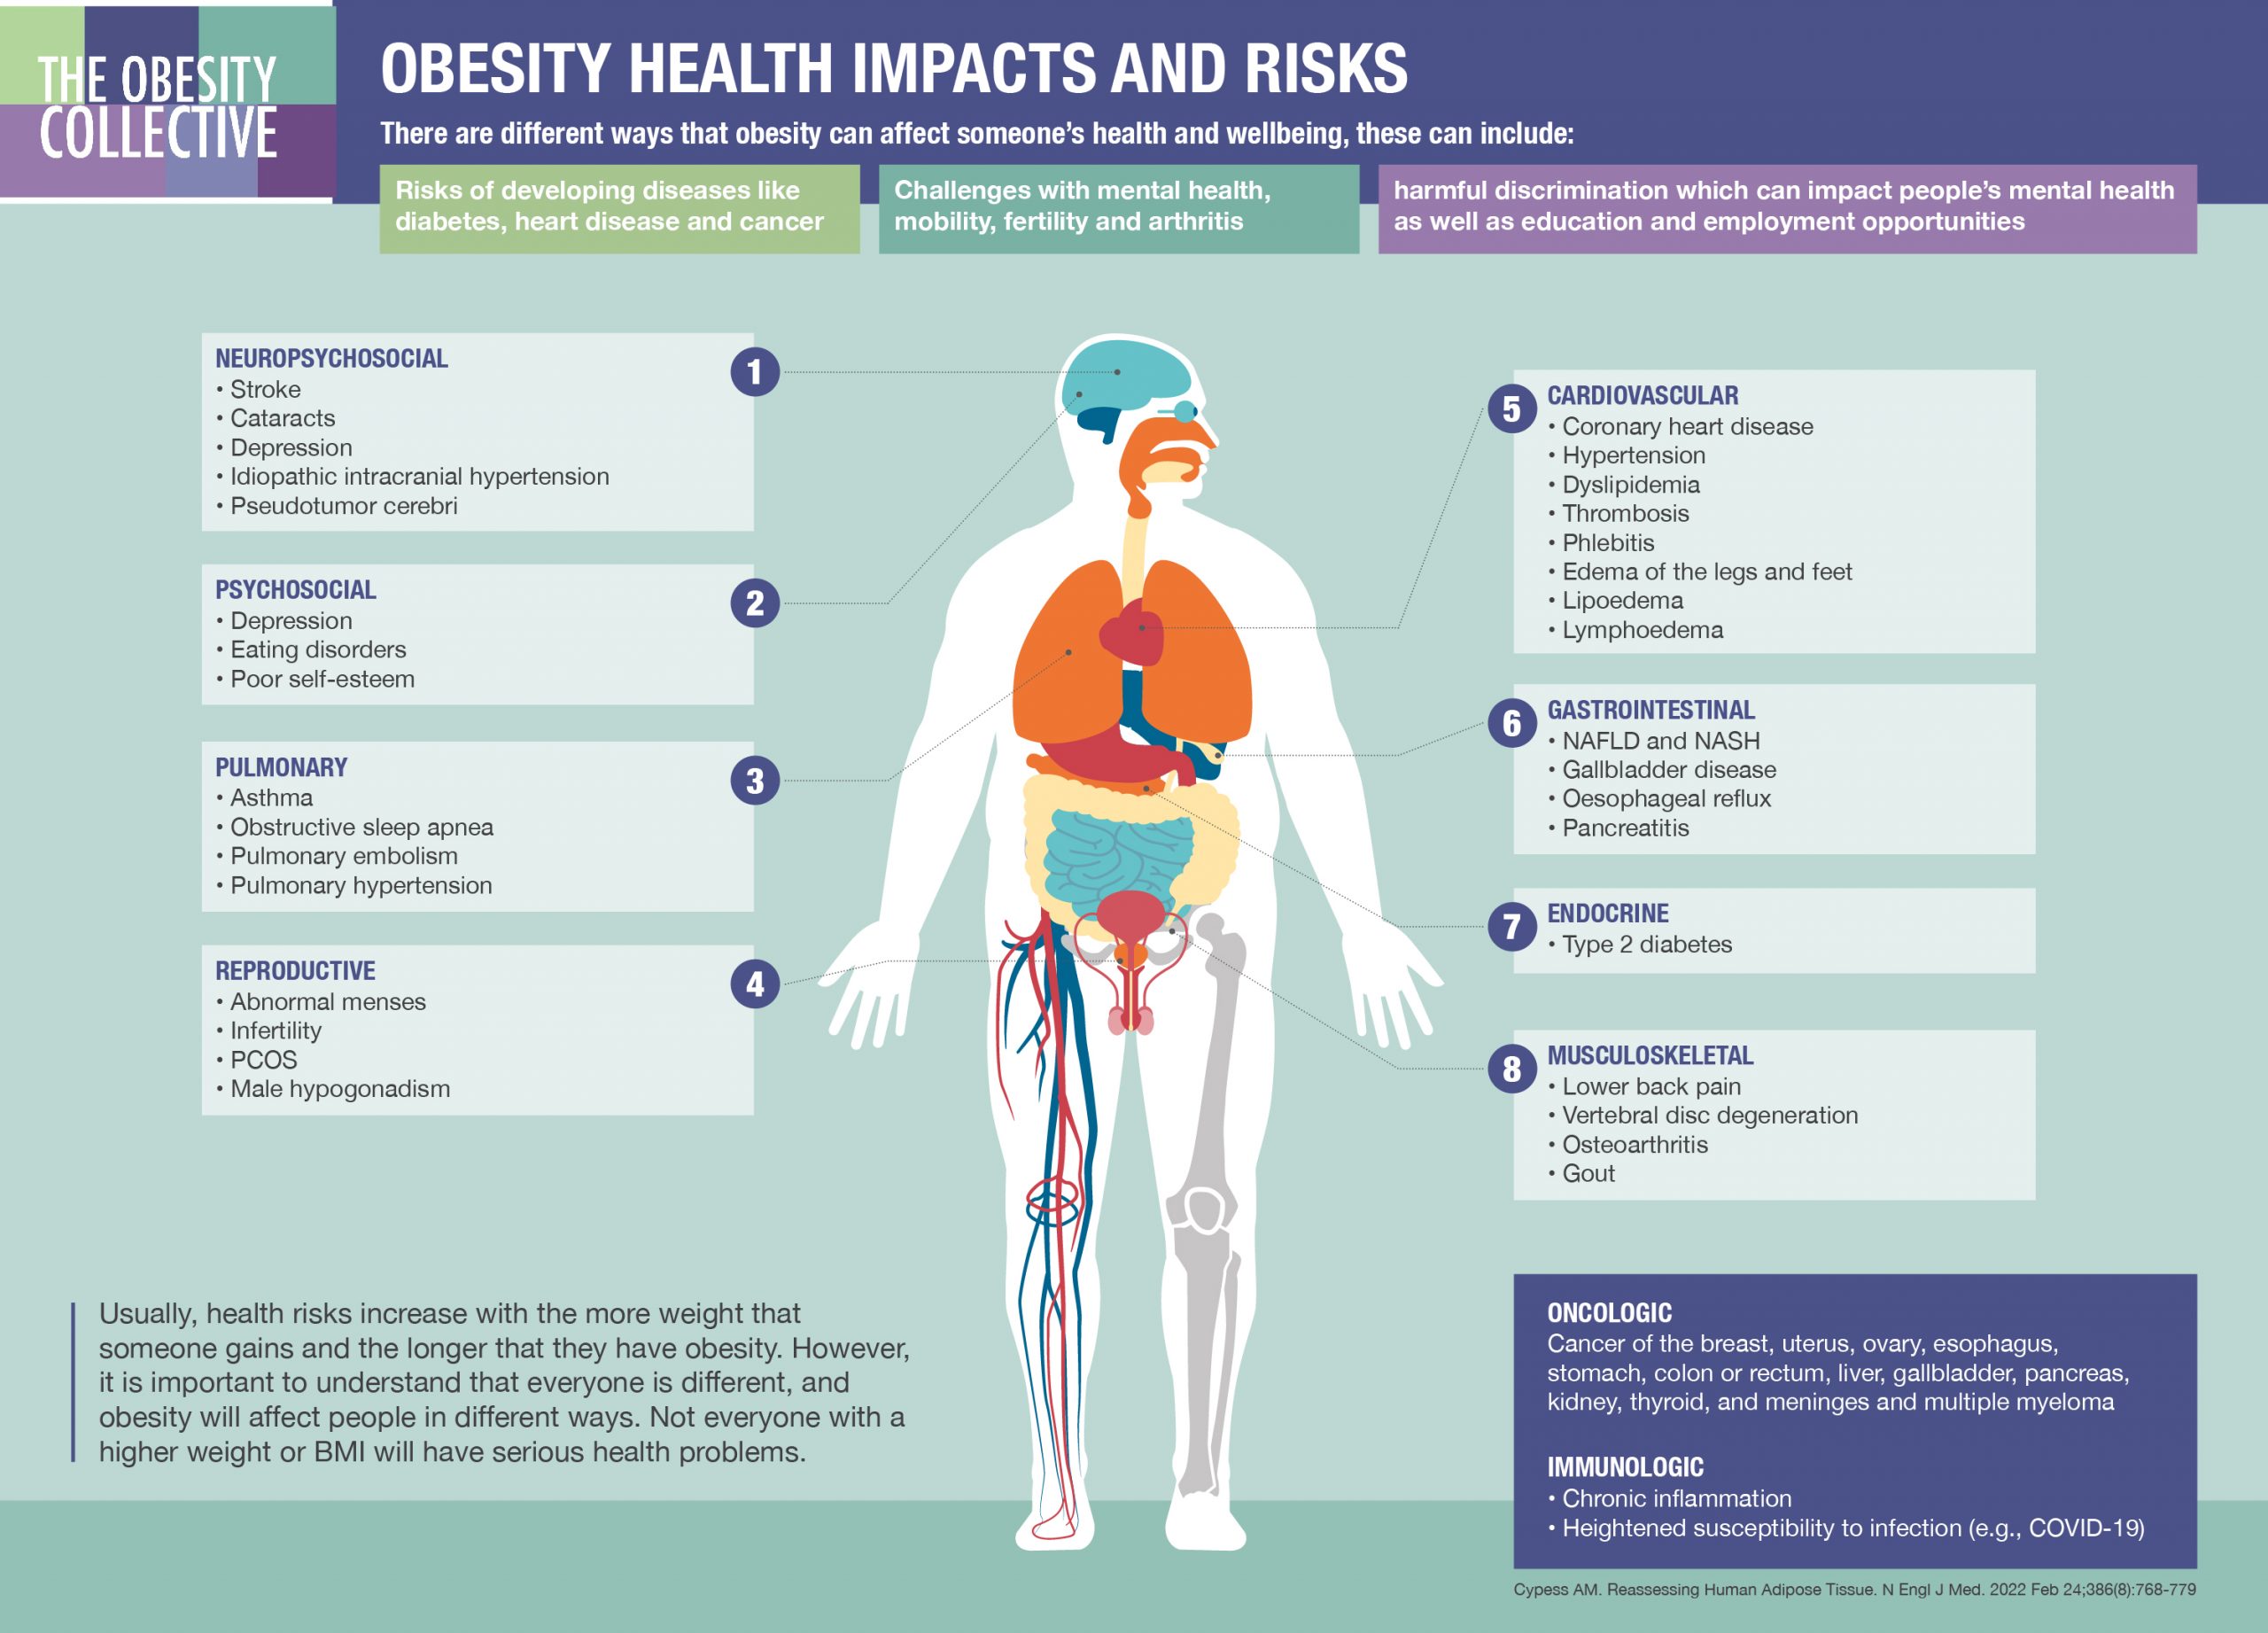 What is obesity - The Obesity Collective